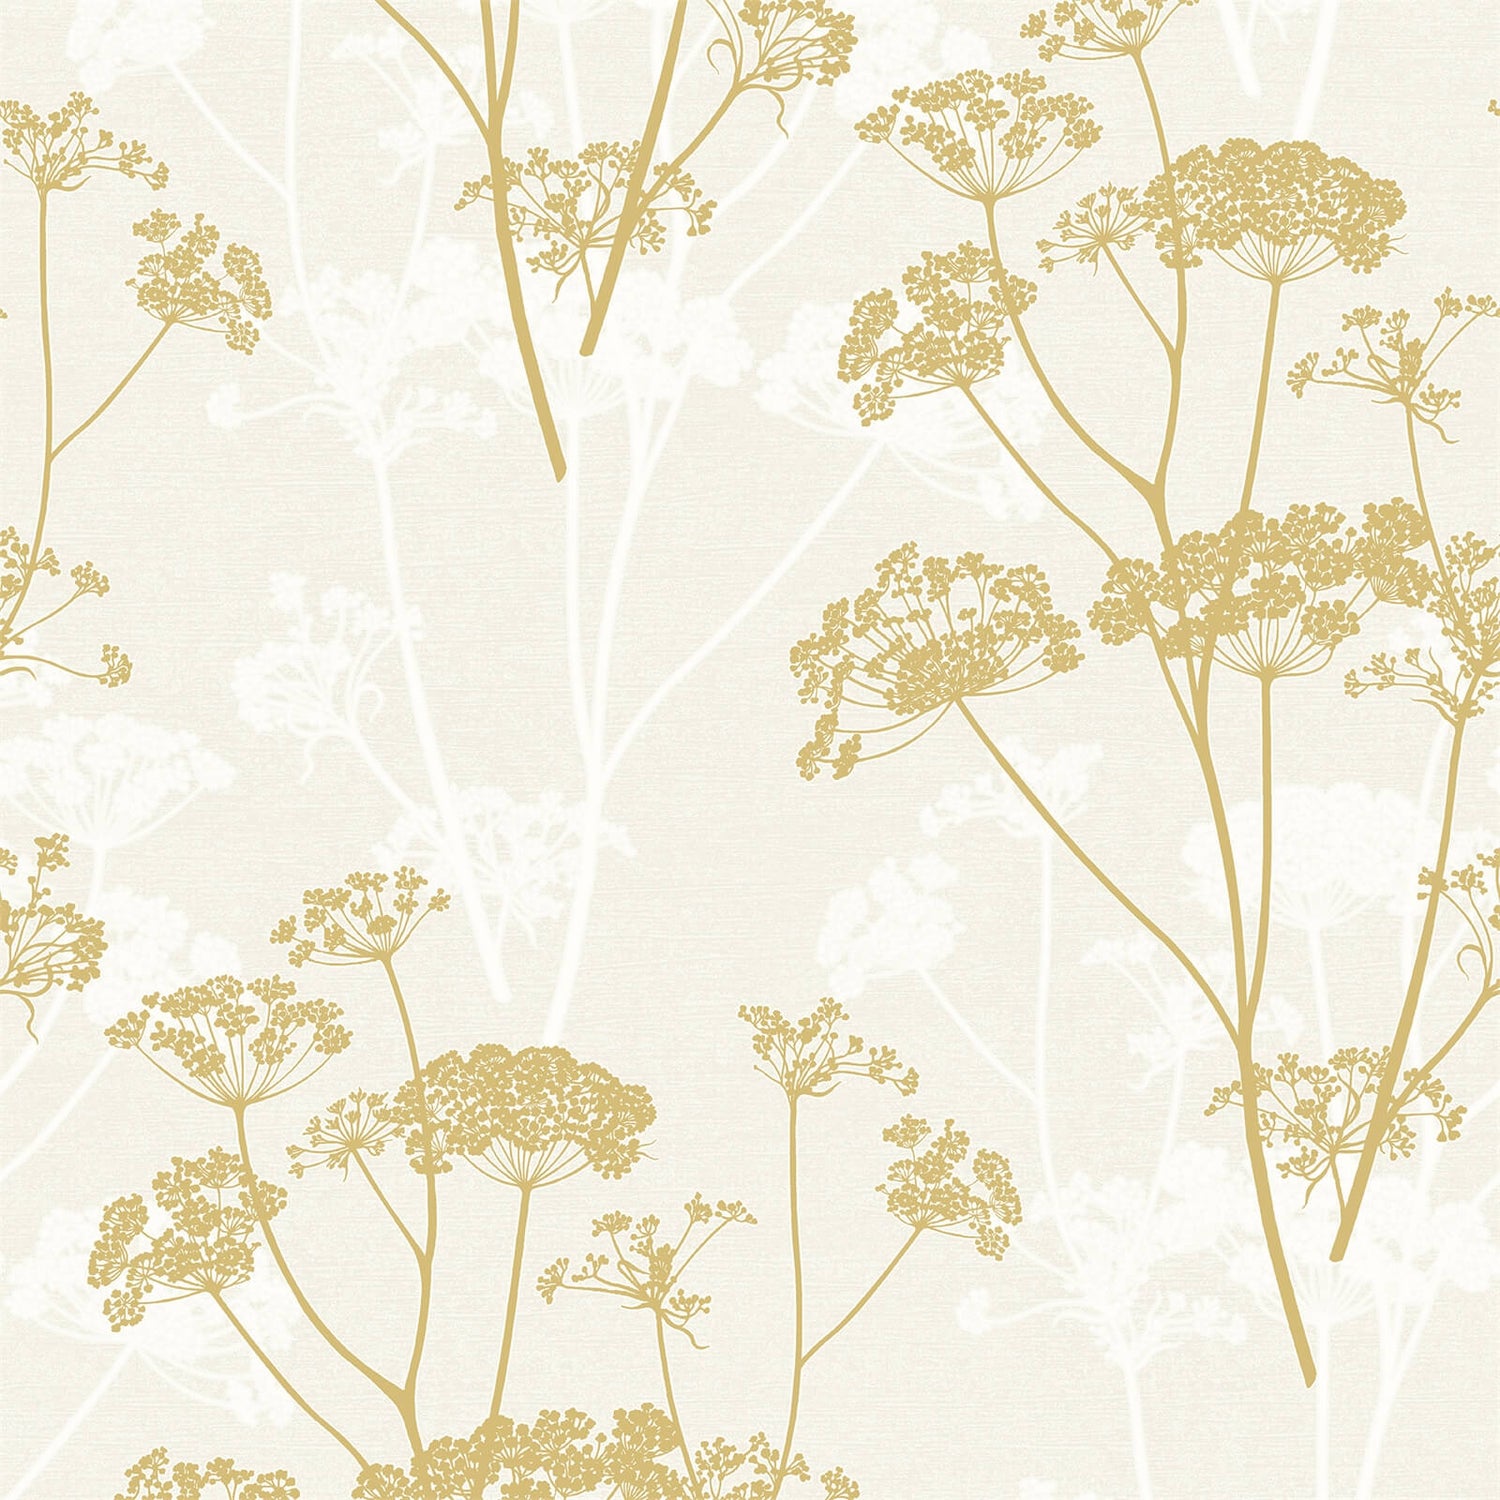 Cow Parsley | Tilly's Cottage